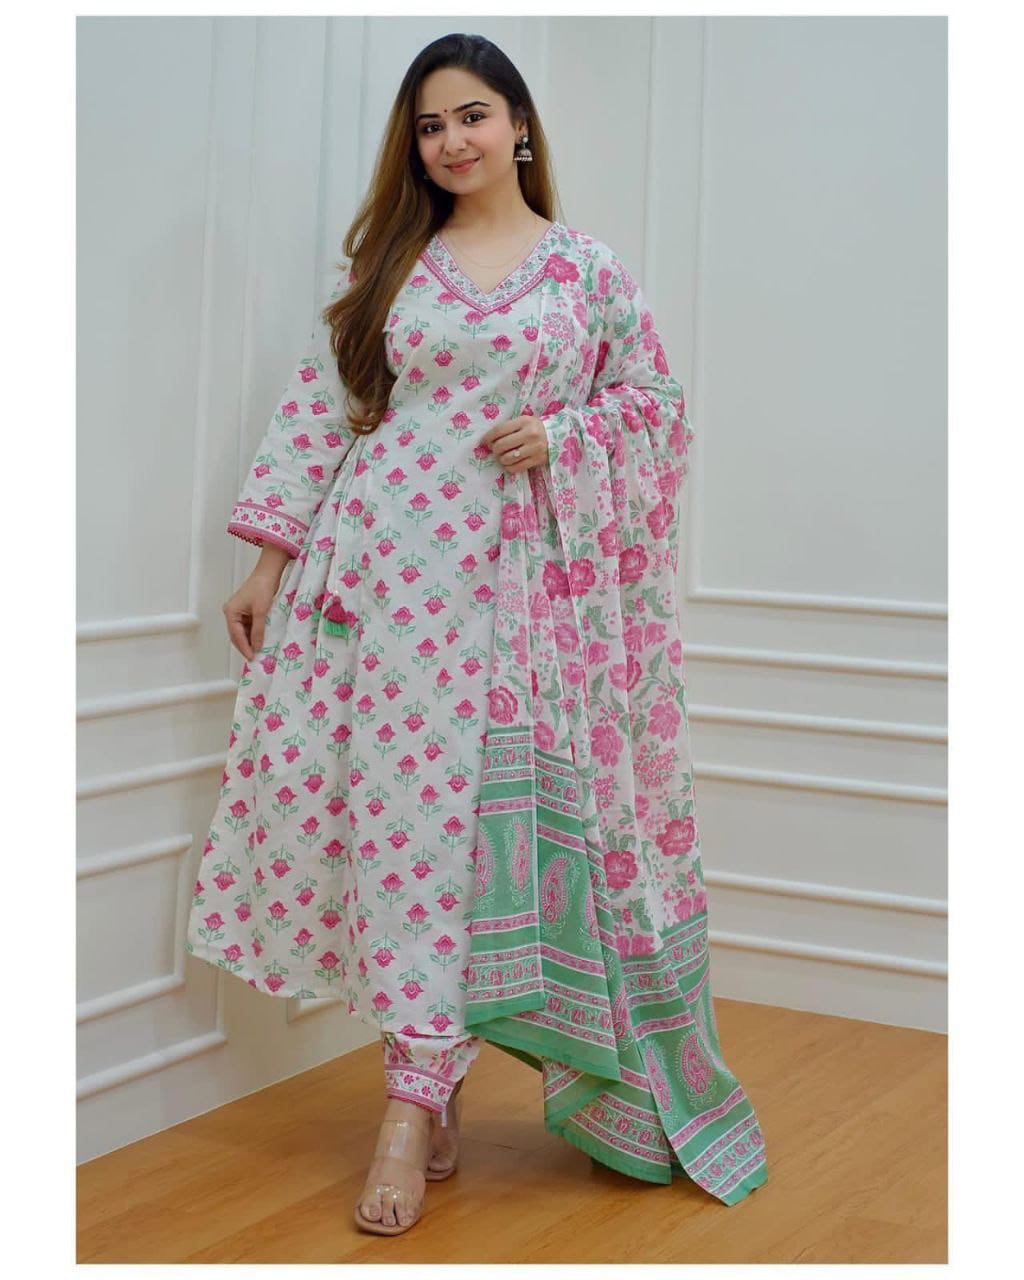 Straight Light Blue Afghani Ladies Cotton Suit set at Rs 1350 in Jaipur